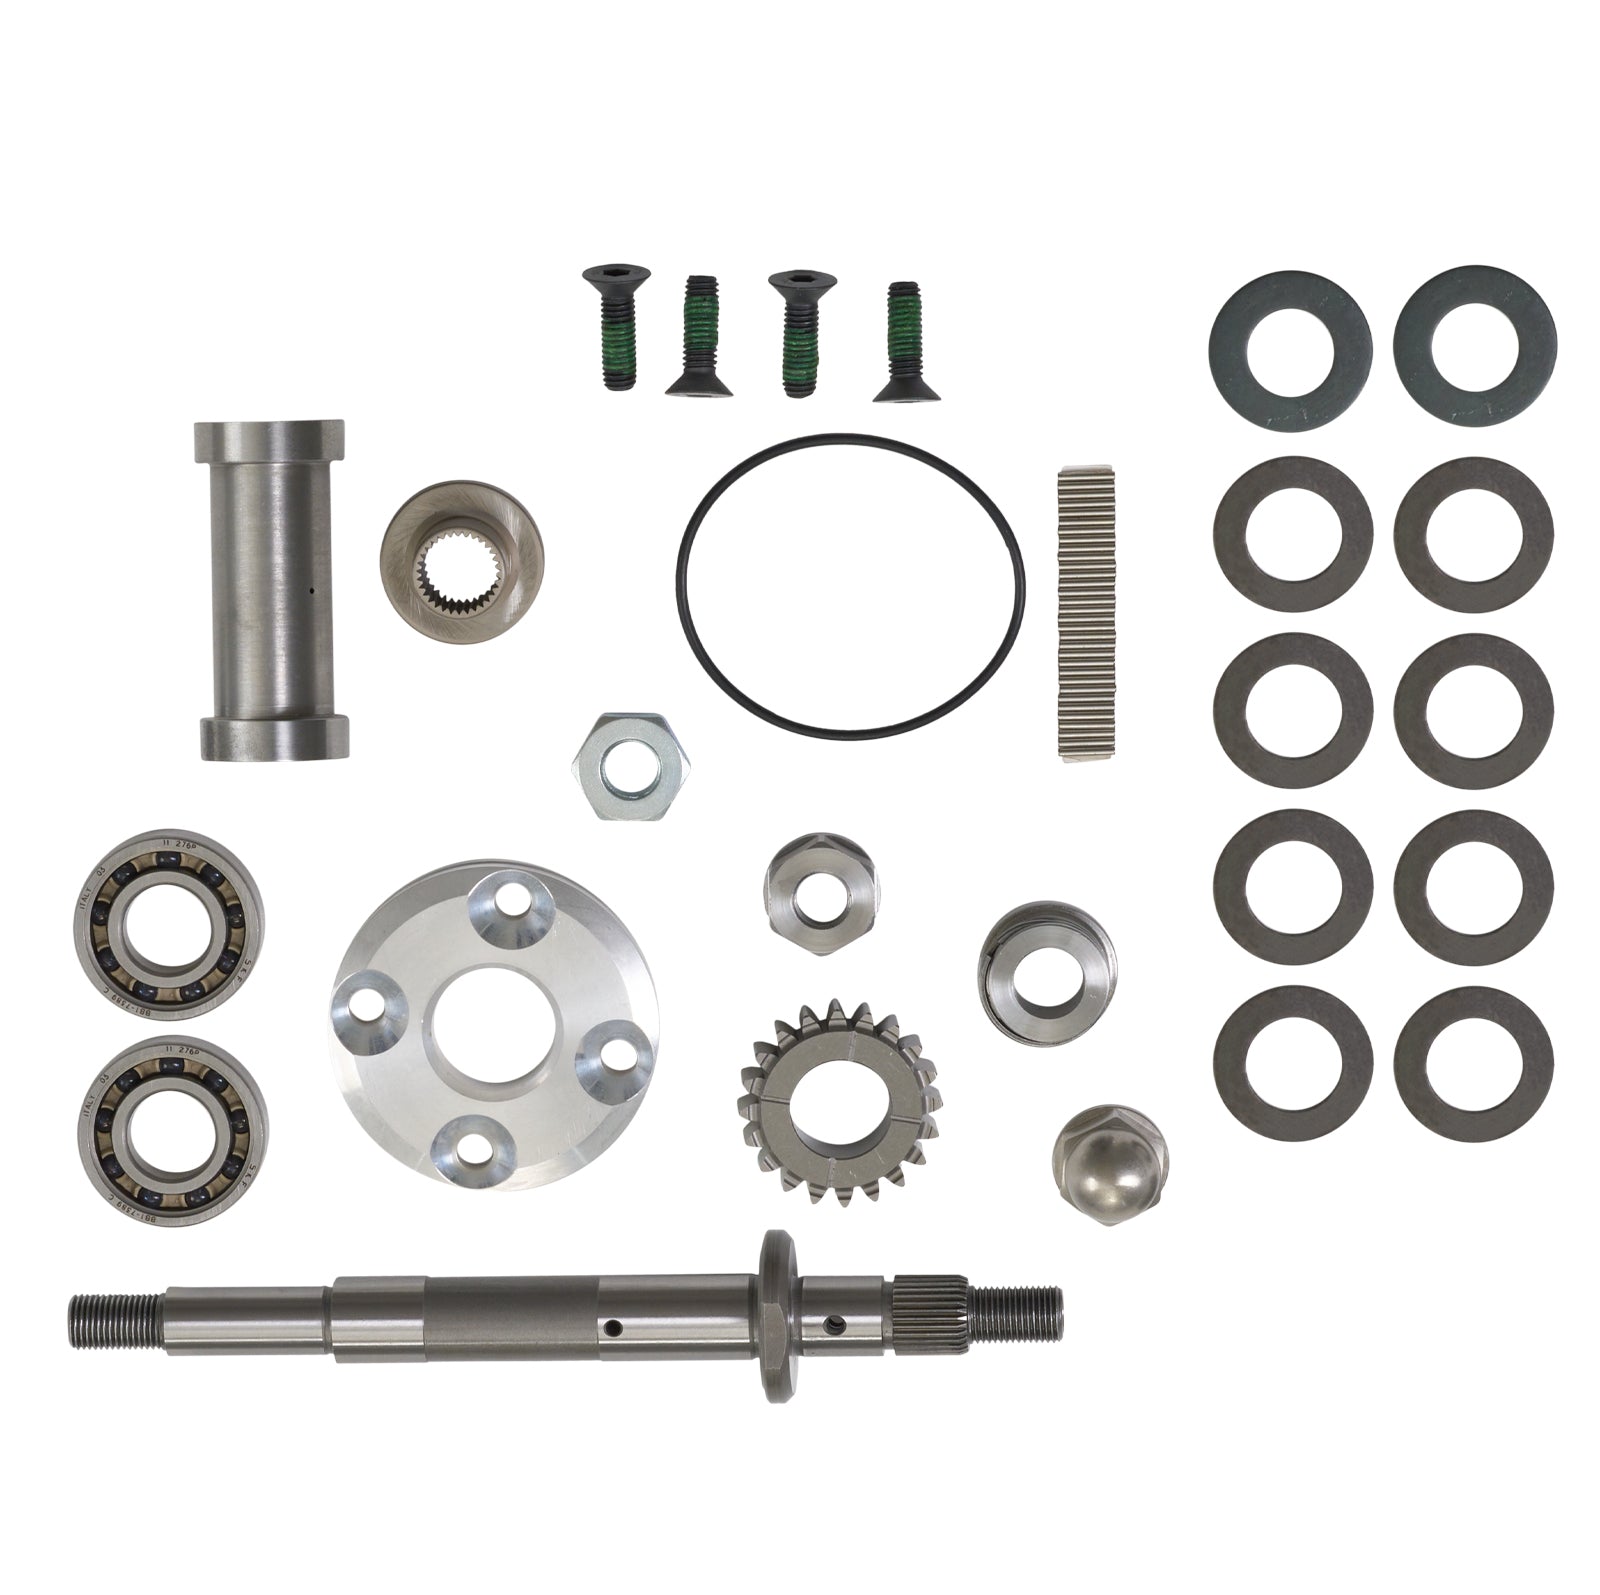 20 Tooth Supercharger Rebuild Kit for Sea-Doo 300